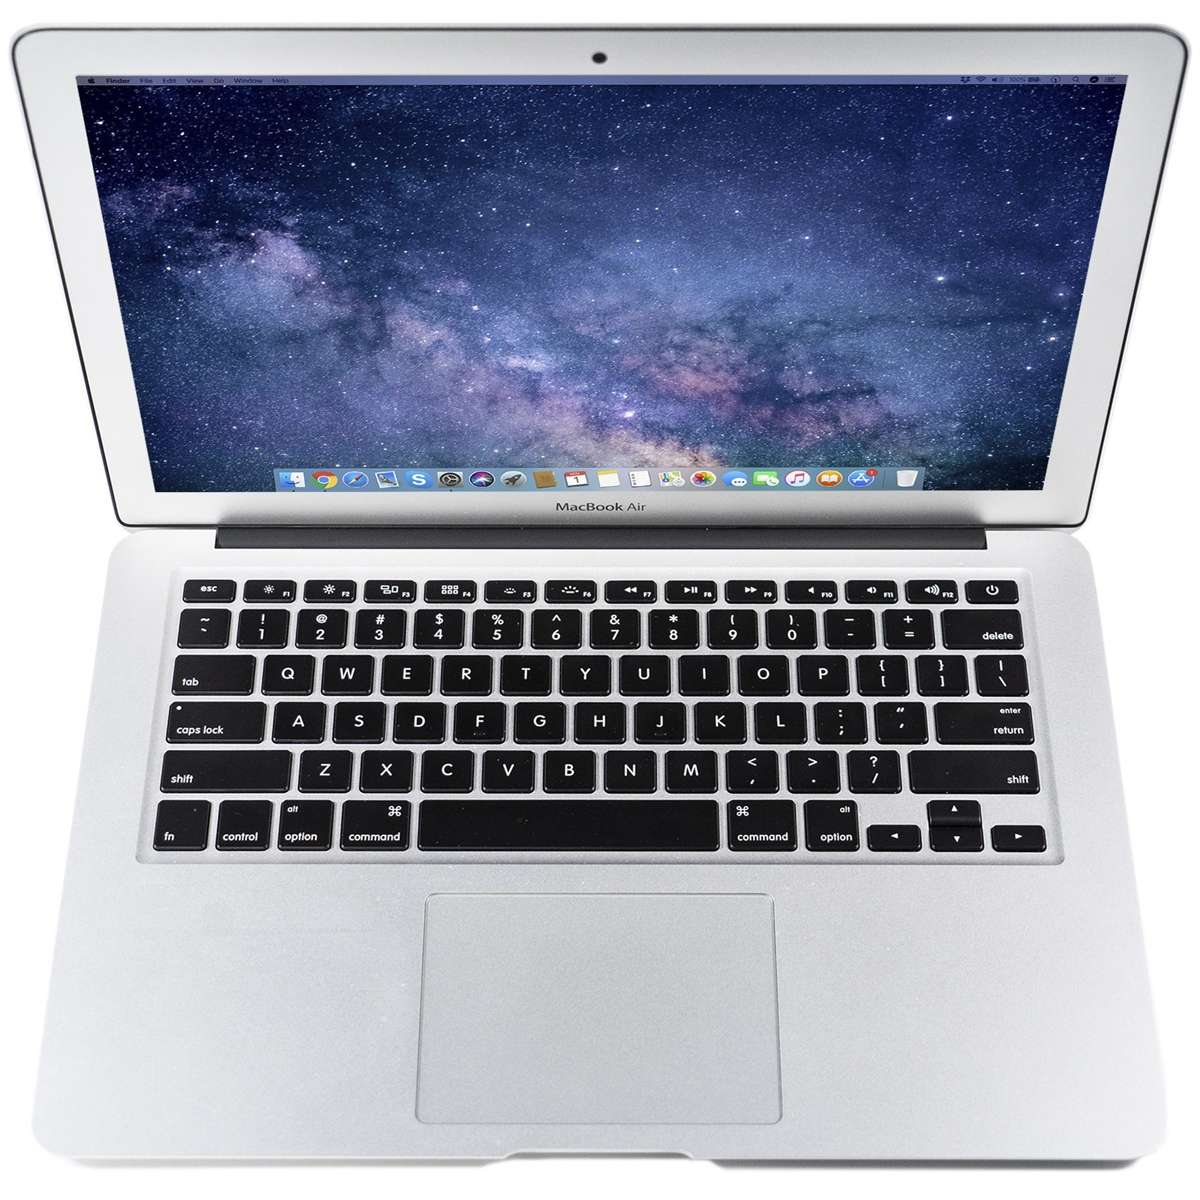  Apple Laptop MacBook Air MD628LL/A Intel Core i5 1.70 GHz 4 GB  Memory 64 GB SSD 13.3in Display (Renewed) : Electronics